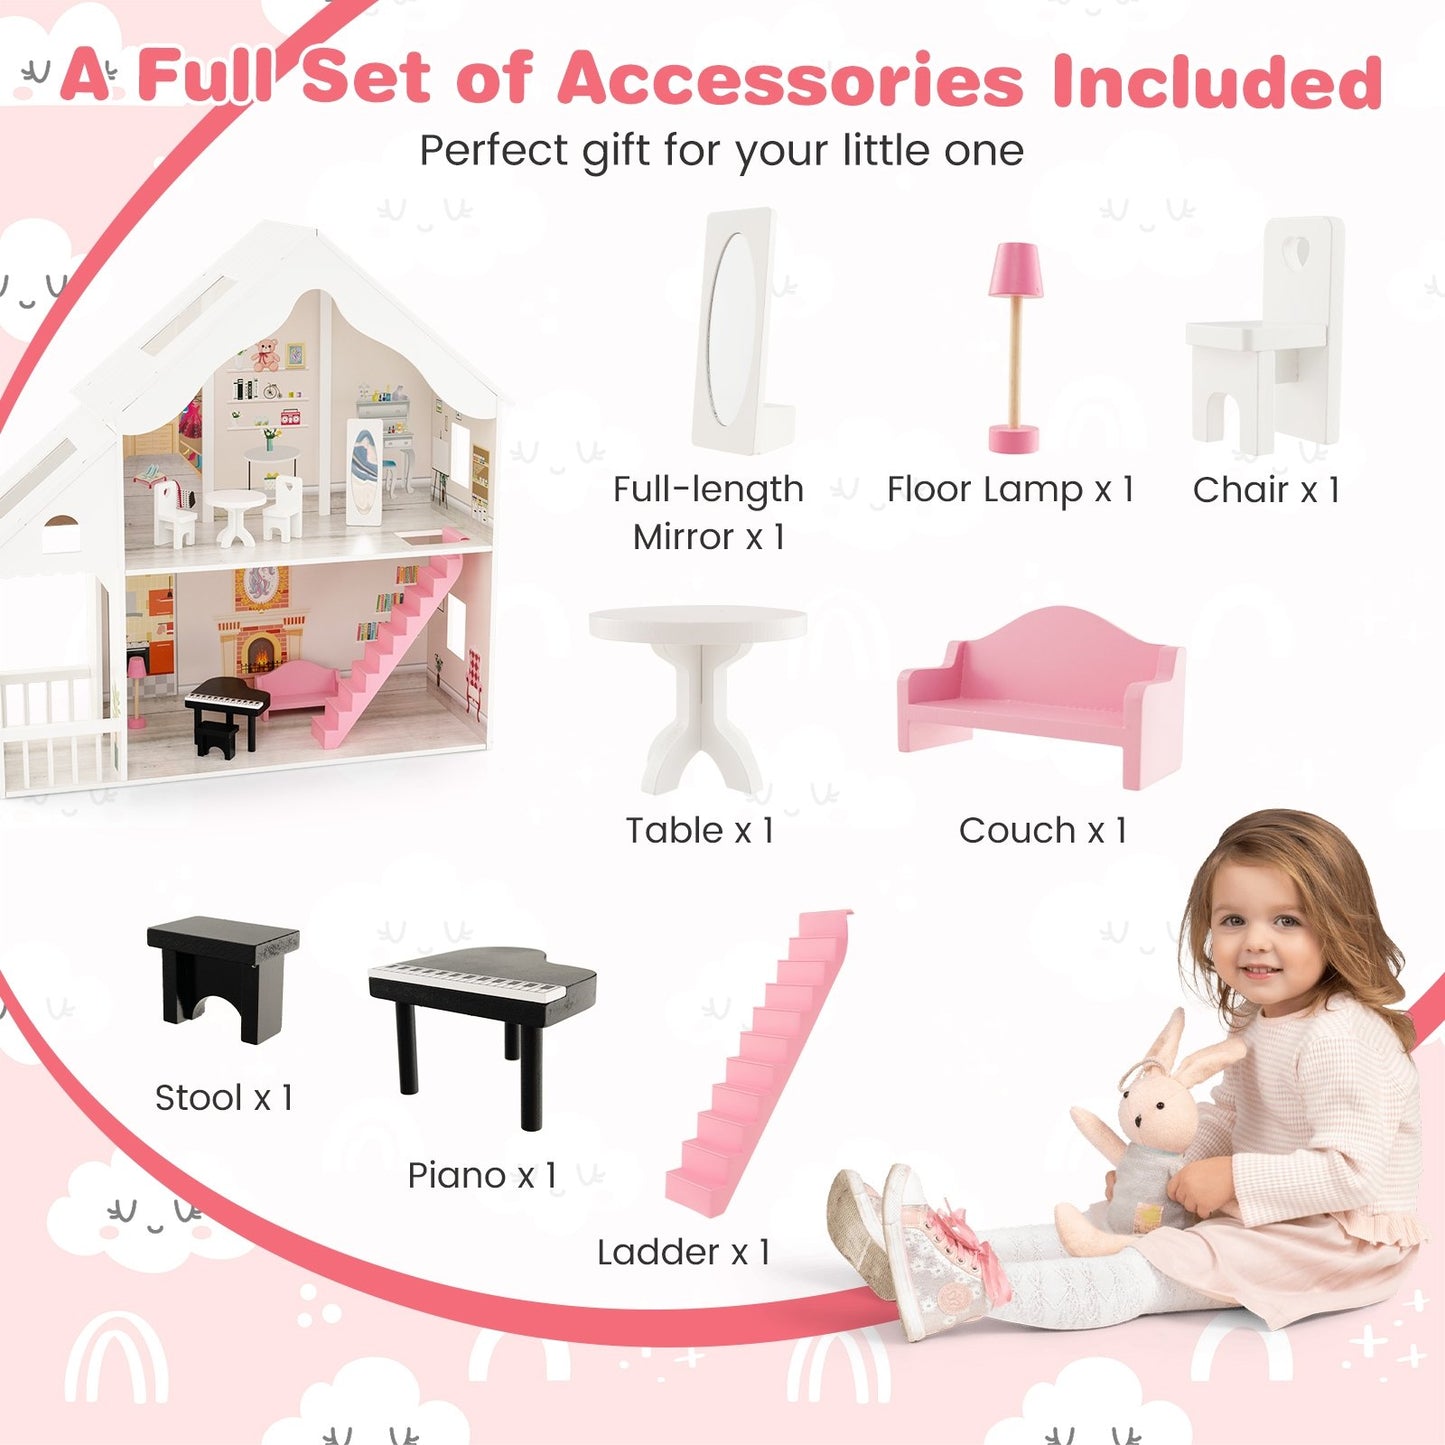 Semi-Opened DIY Dollhouse with Simulated Rooms and Furniture Set, White